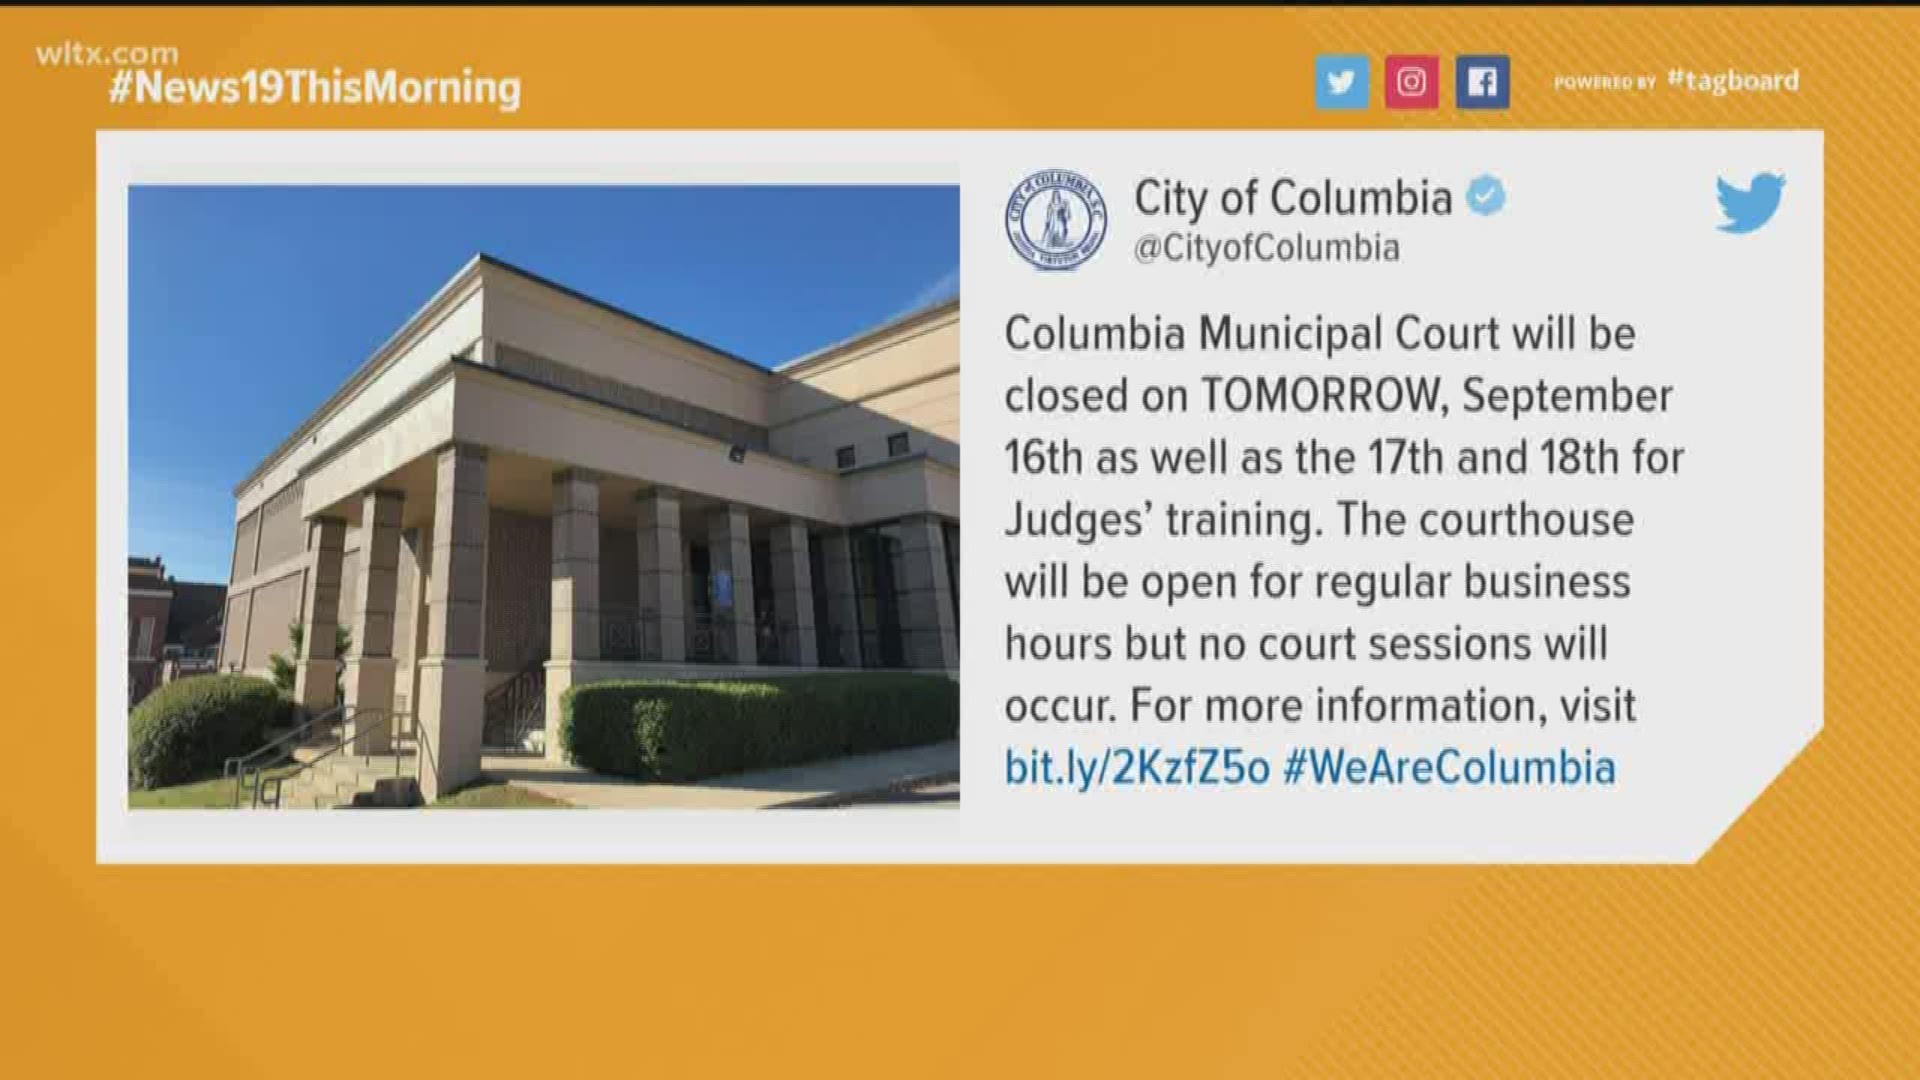 The courthouse will be open for regular business hours but no court sessions will occur.